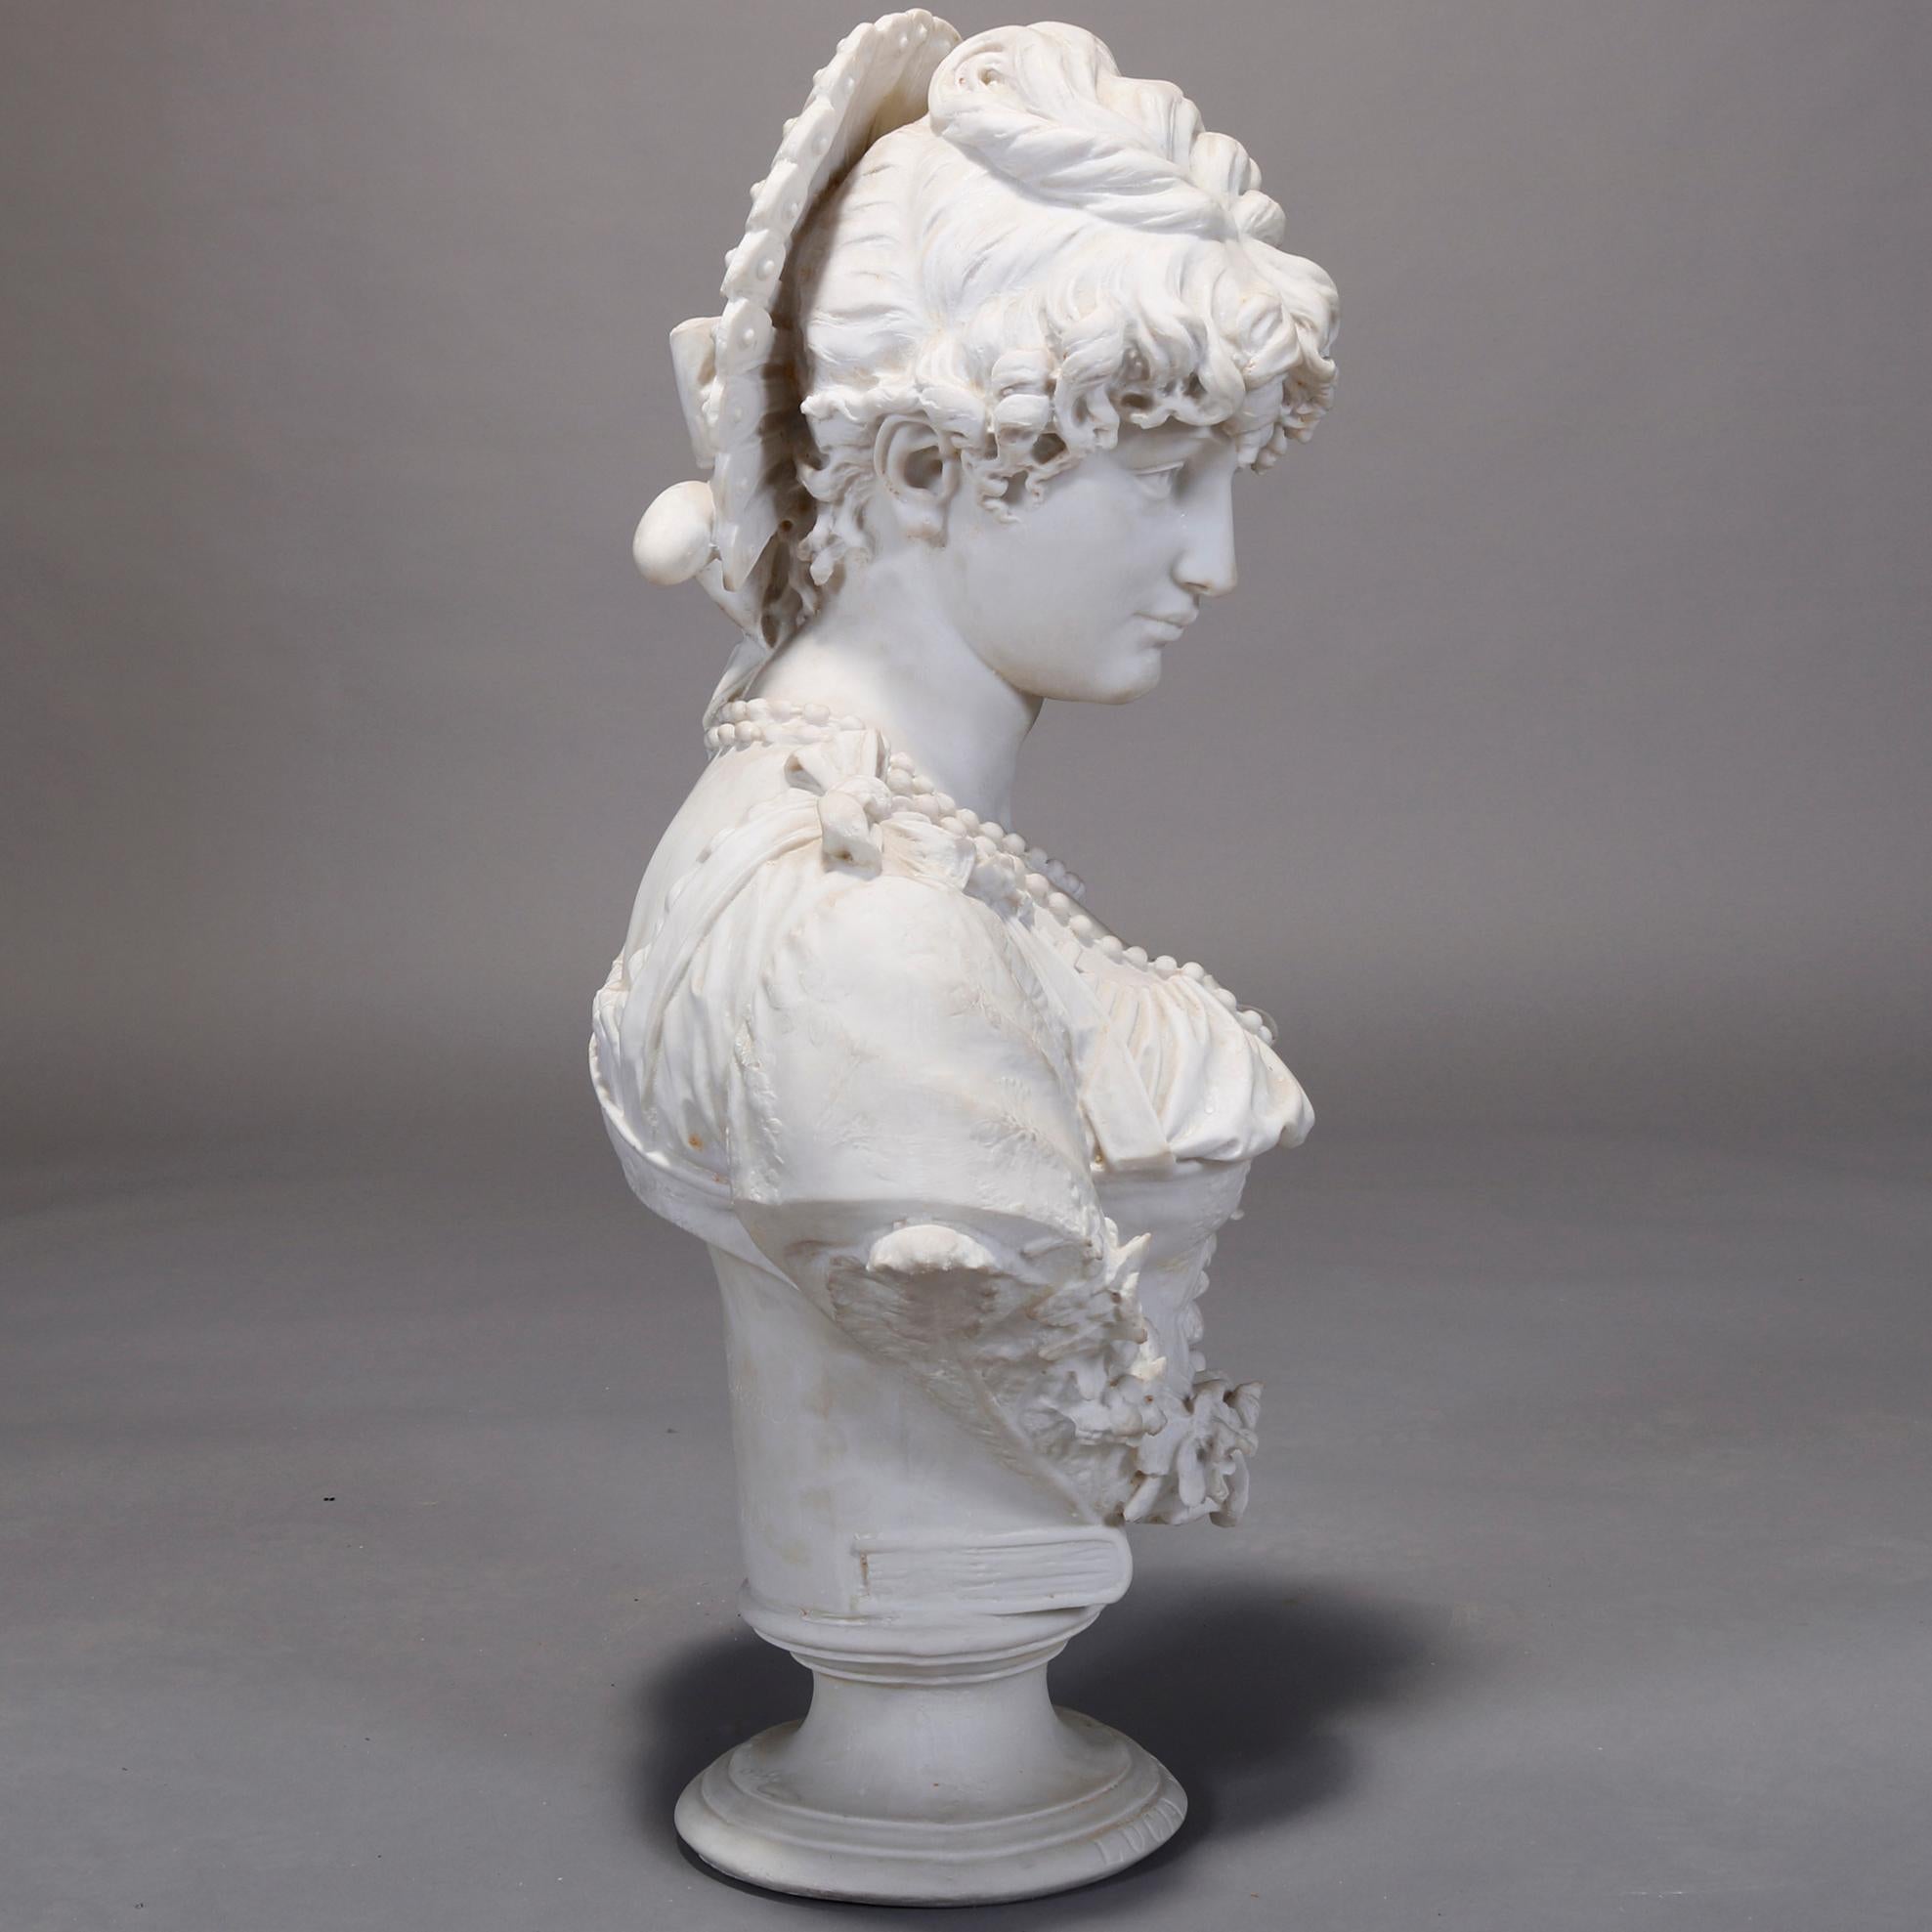 An antique oversized bust after original carved marble portrait sculpture of Lucia Mondella by Enrico Lapini (Italian, 1846-1908) offers parian bust of young woman, inscribed en verso 